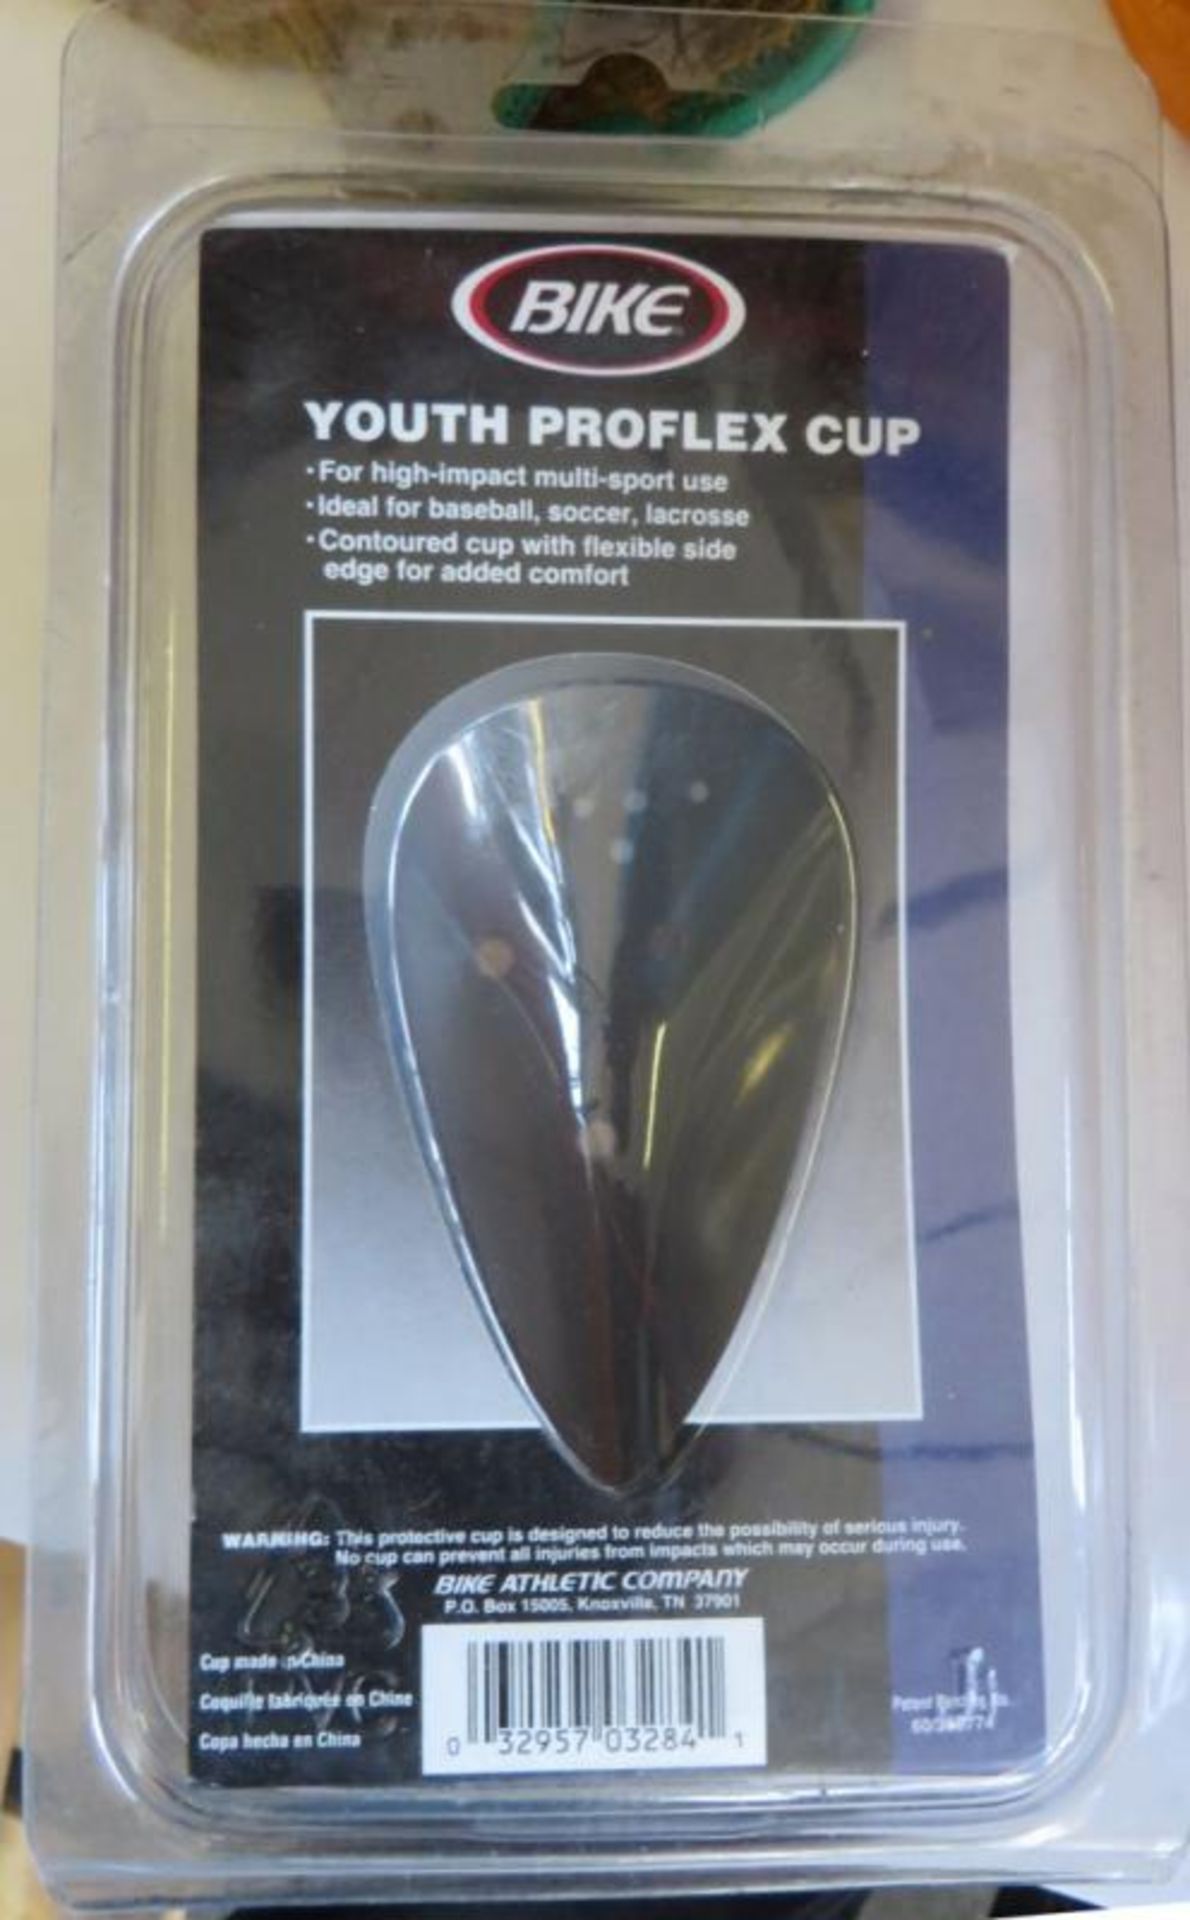 28 x Bike Youth Proflex 2 Protective Cups Large Size - CL185 - Ref: DRT0668 - Location: Stoke ST3 - Image 4 of 5